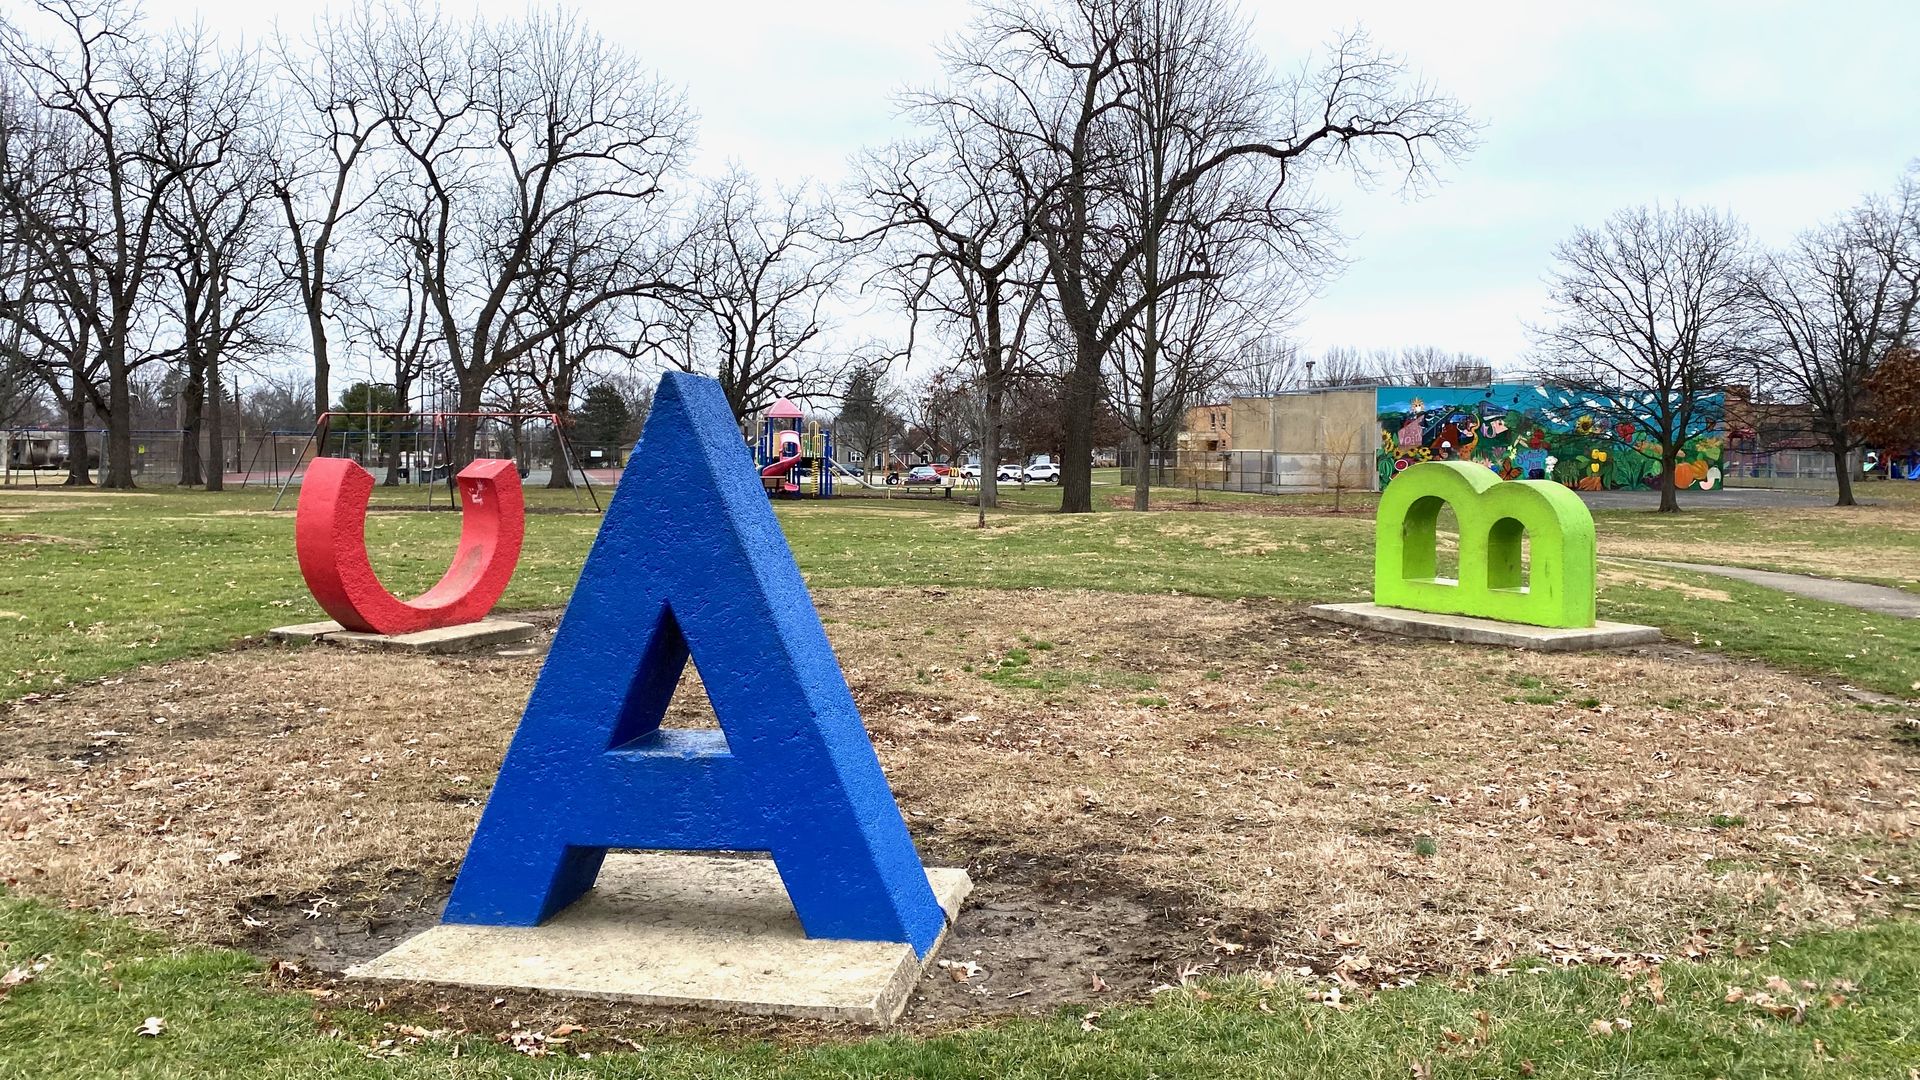 Large concrete sculptures of a blue "A" in the foreground and a red "C" and green "B" in the background on their sides